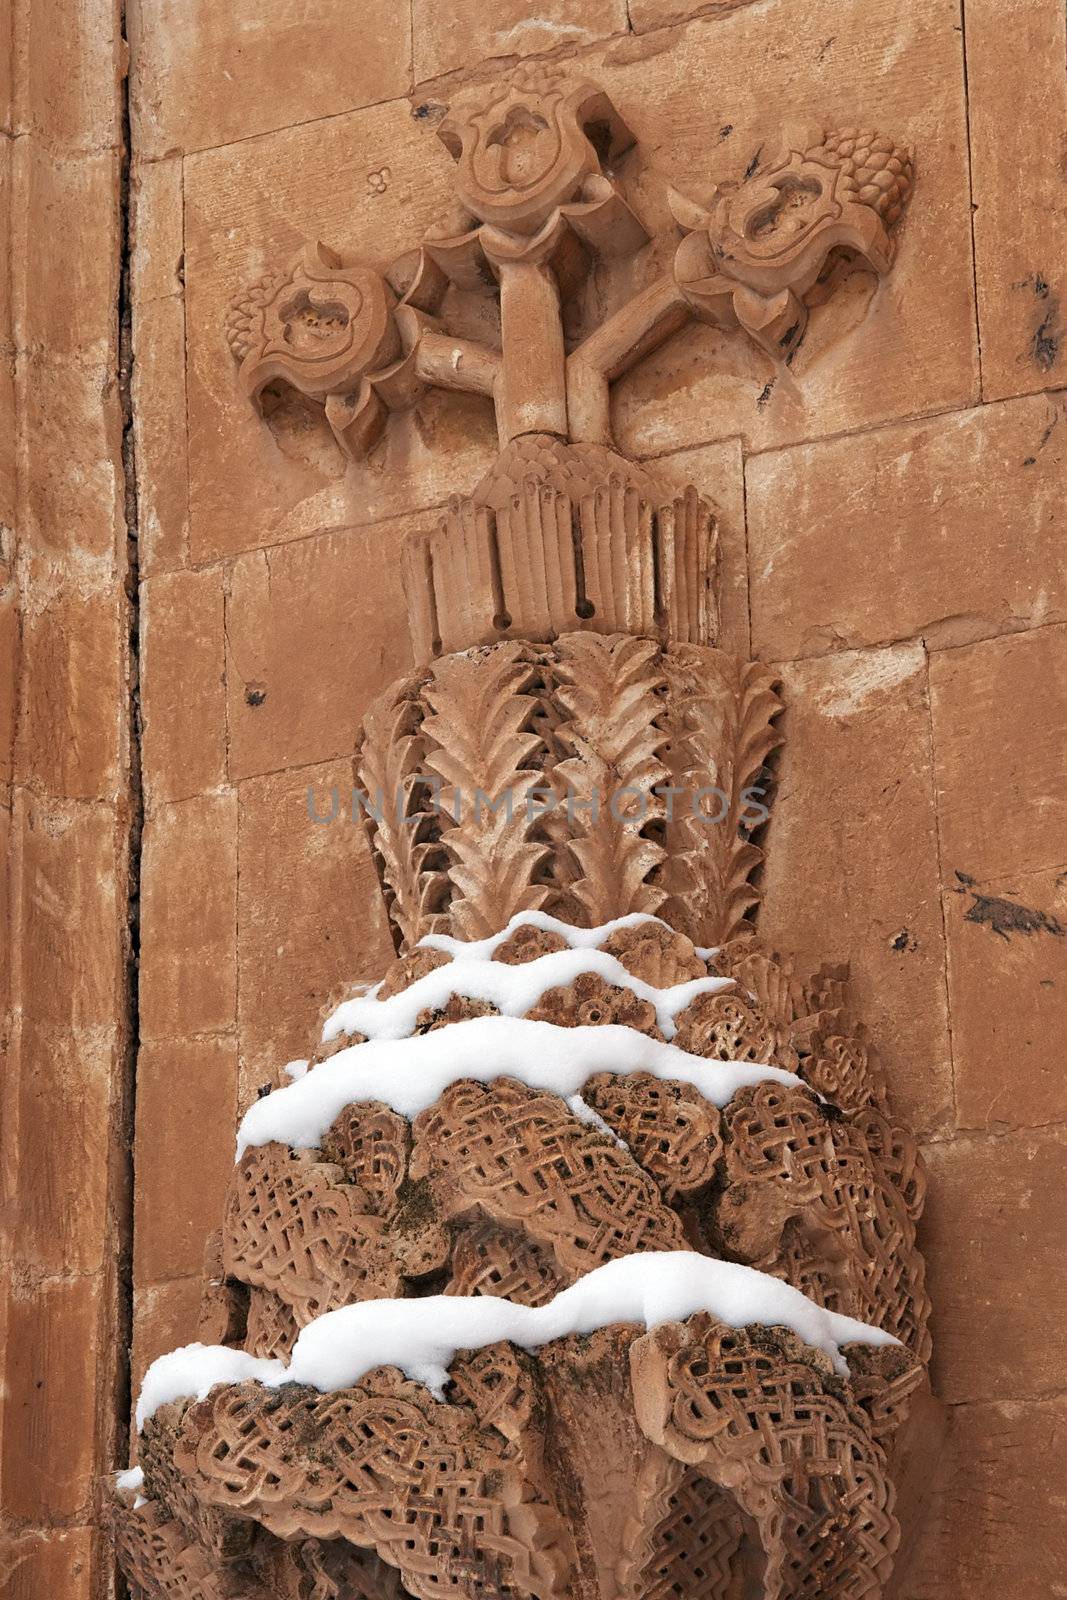 Carving on facade of Ishak Pasha Palace. It is an 18th century complex located near Mount Ararat in the Dogubayazit district of Agri province of Turkey.